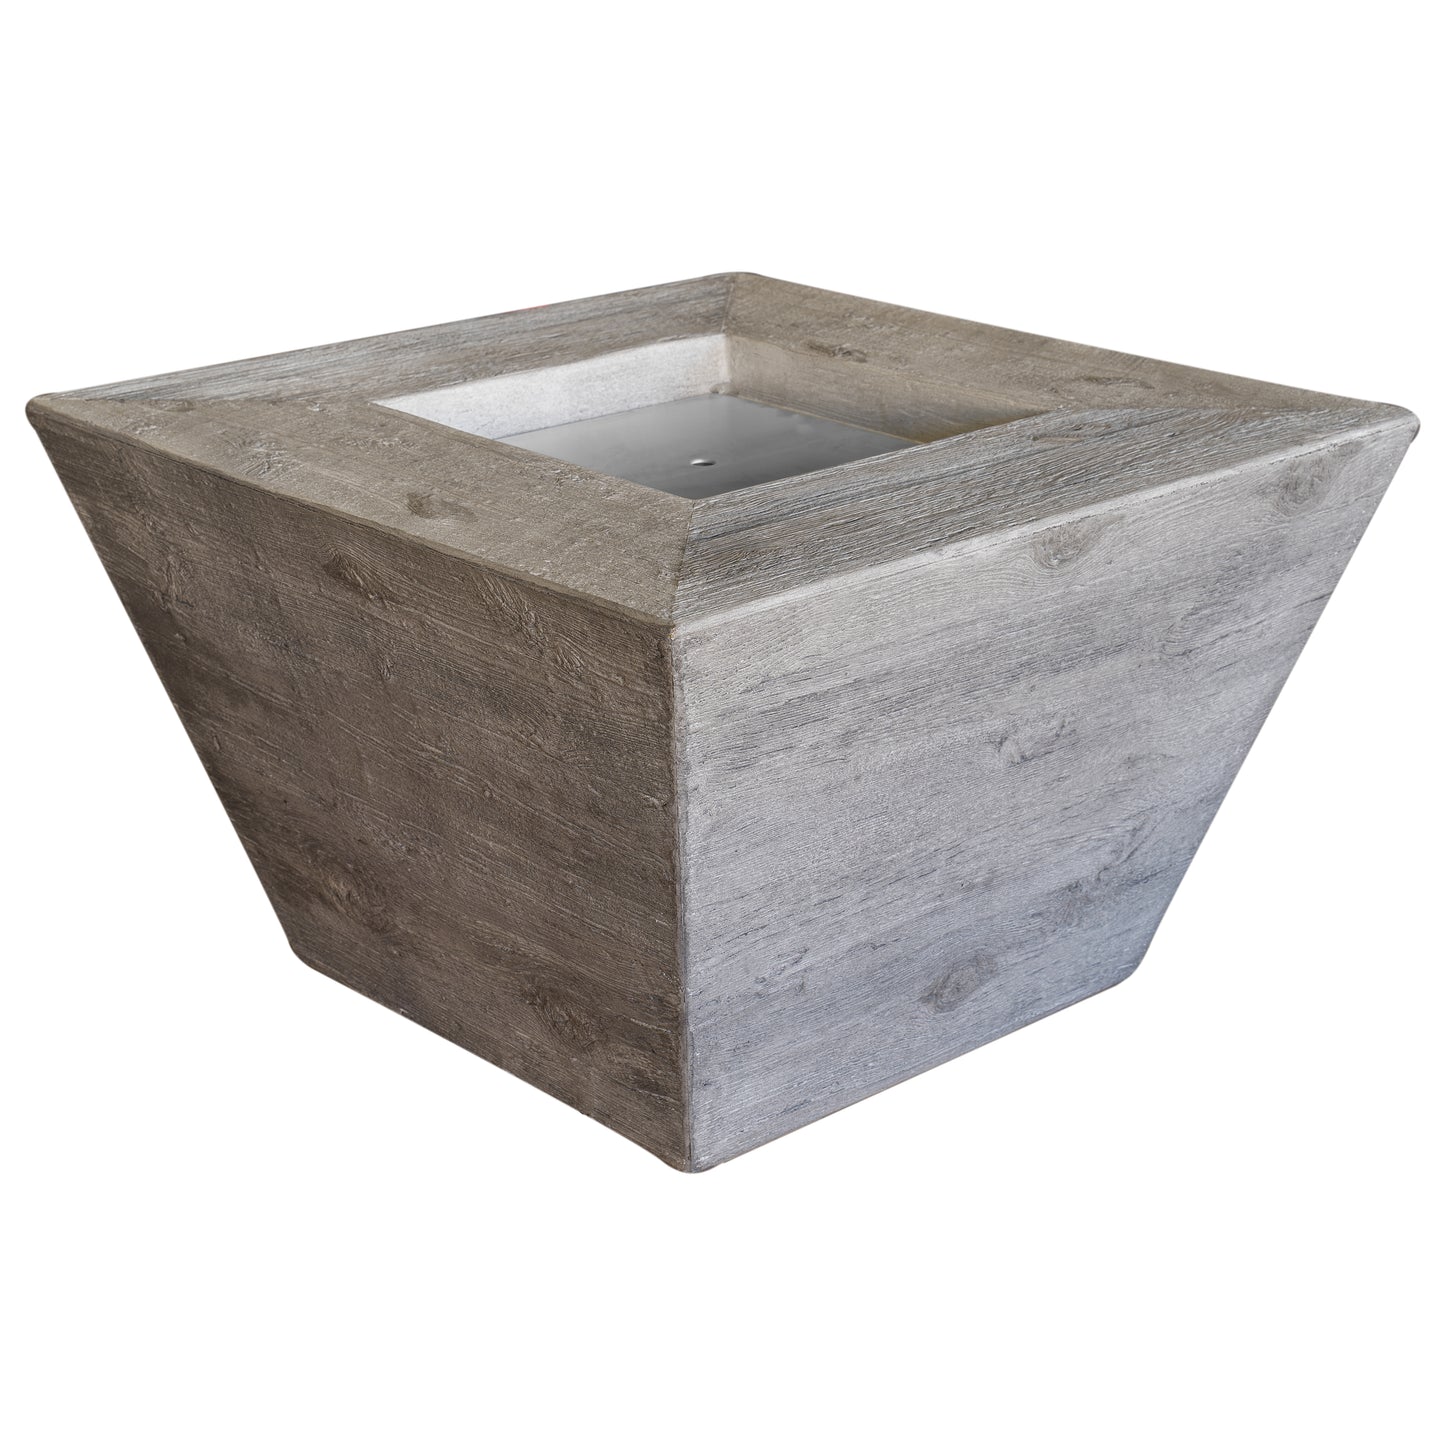 Square Plymouth Woodgrain Concrete Fire Pit 48" - 24" Tall - Electronic Ignition